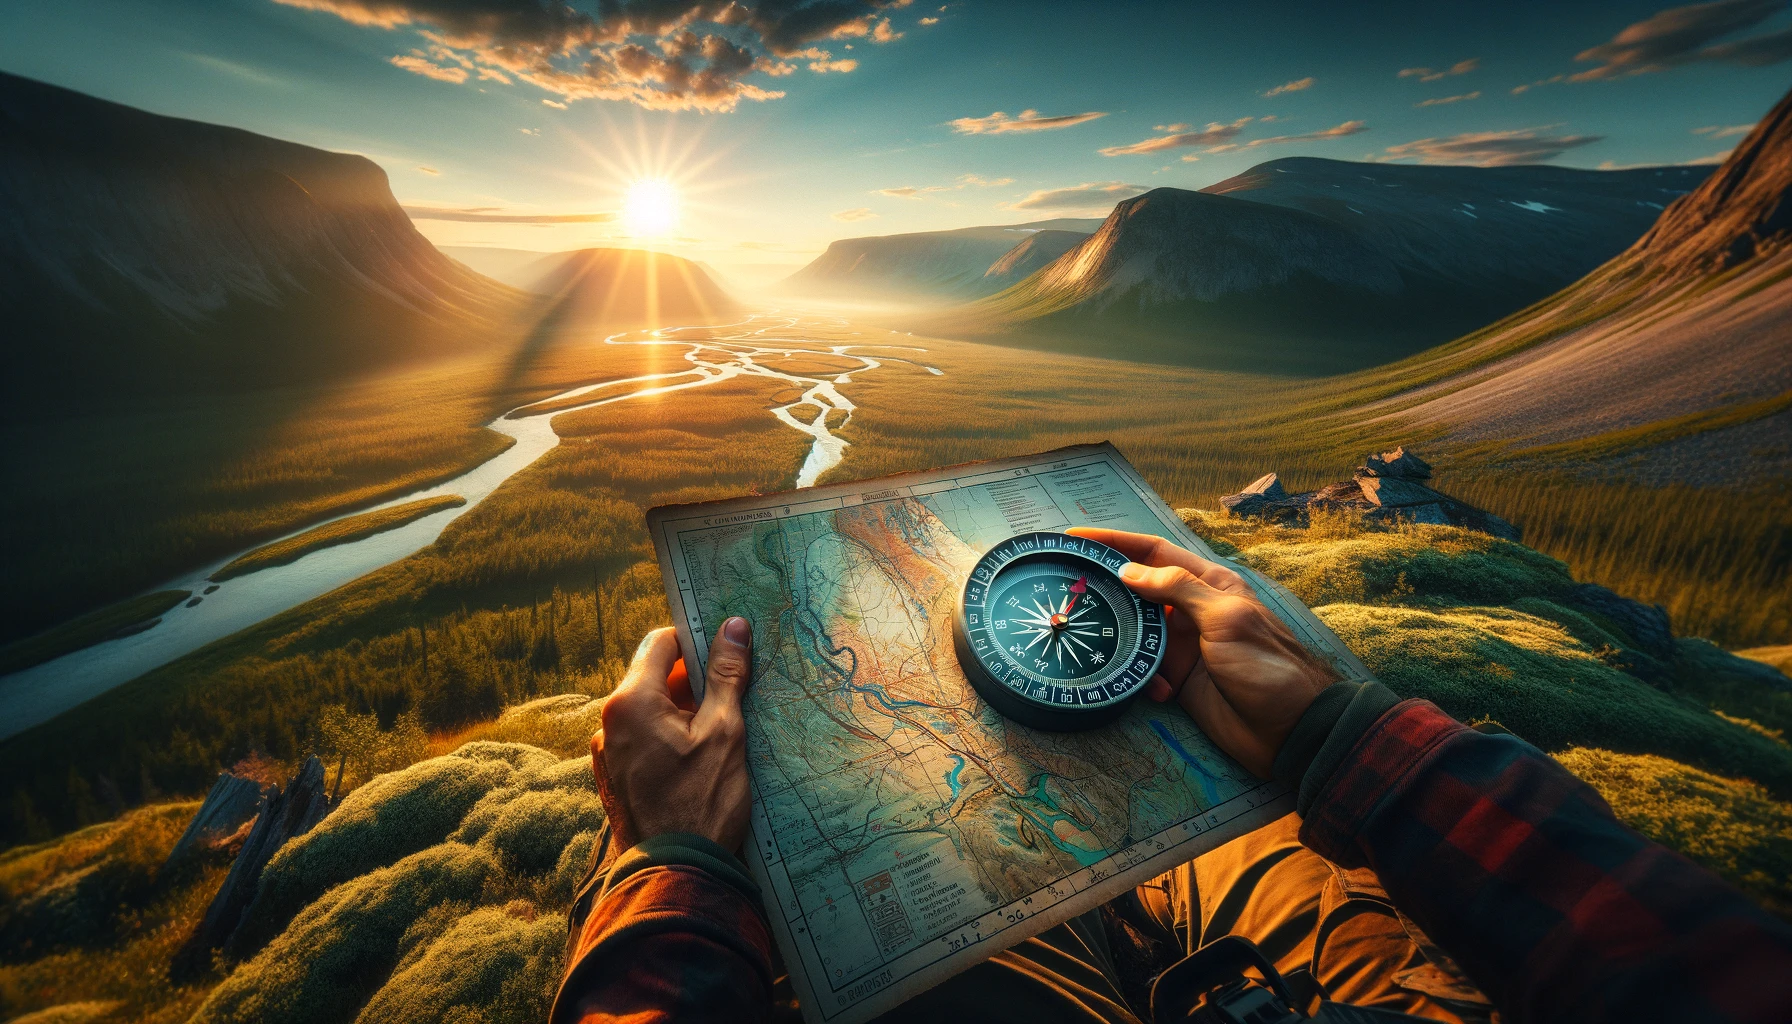 Dramatic survival scene depicting essential navigation skills, with a person in wilderness using a compass and map during golden hour, surrounded by natural landmarks like mountains, a river, and forests, highlighting the importance of orienting and exploration skills